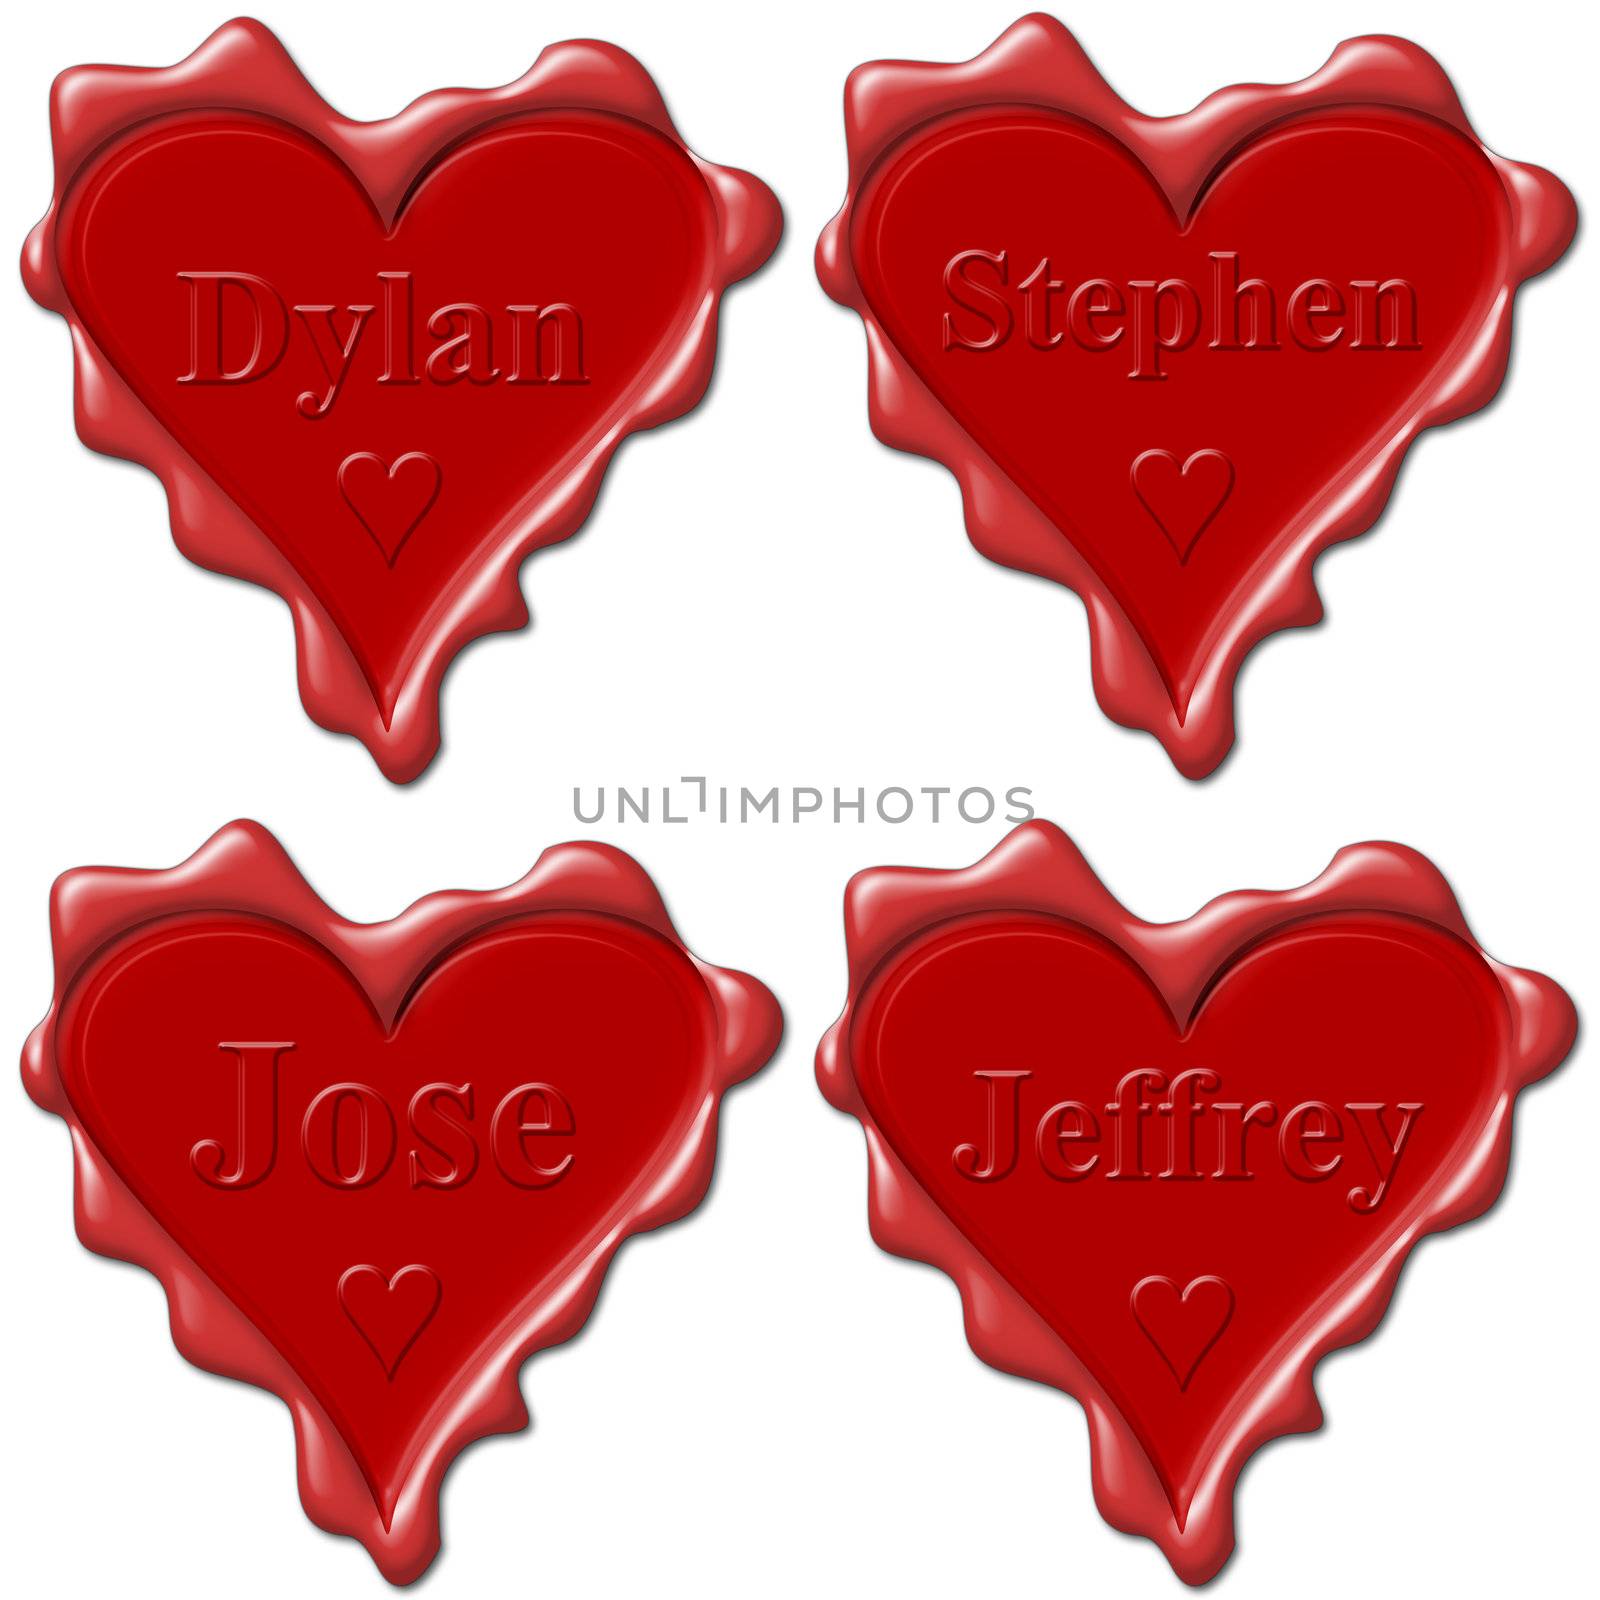 Valentine love hearts with names: Dylan , Stephen, Jose, Jeffrey by mozzyb